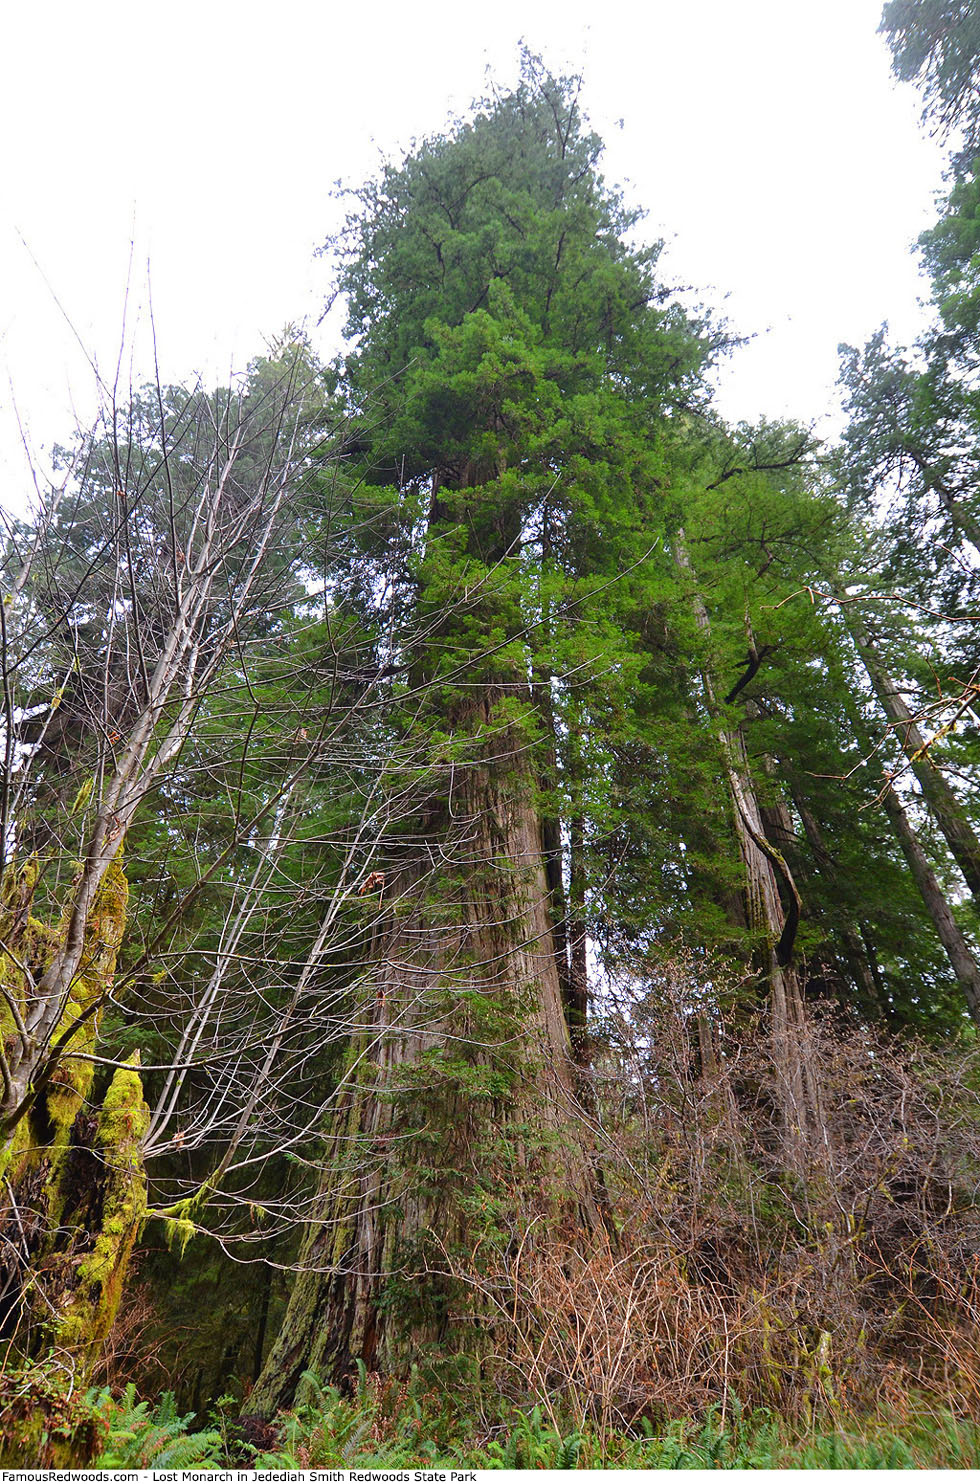 Jedediah Smith Redwoods State Park - Lost Monarch Tree